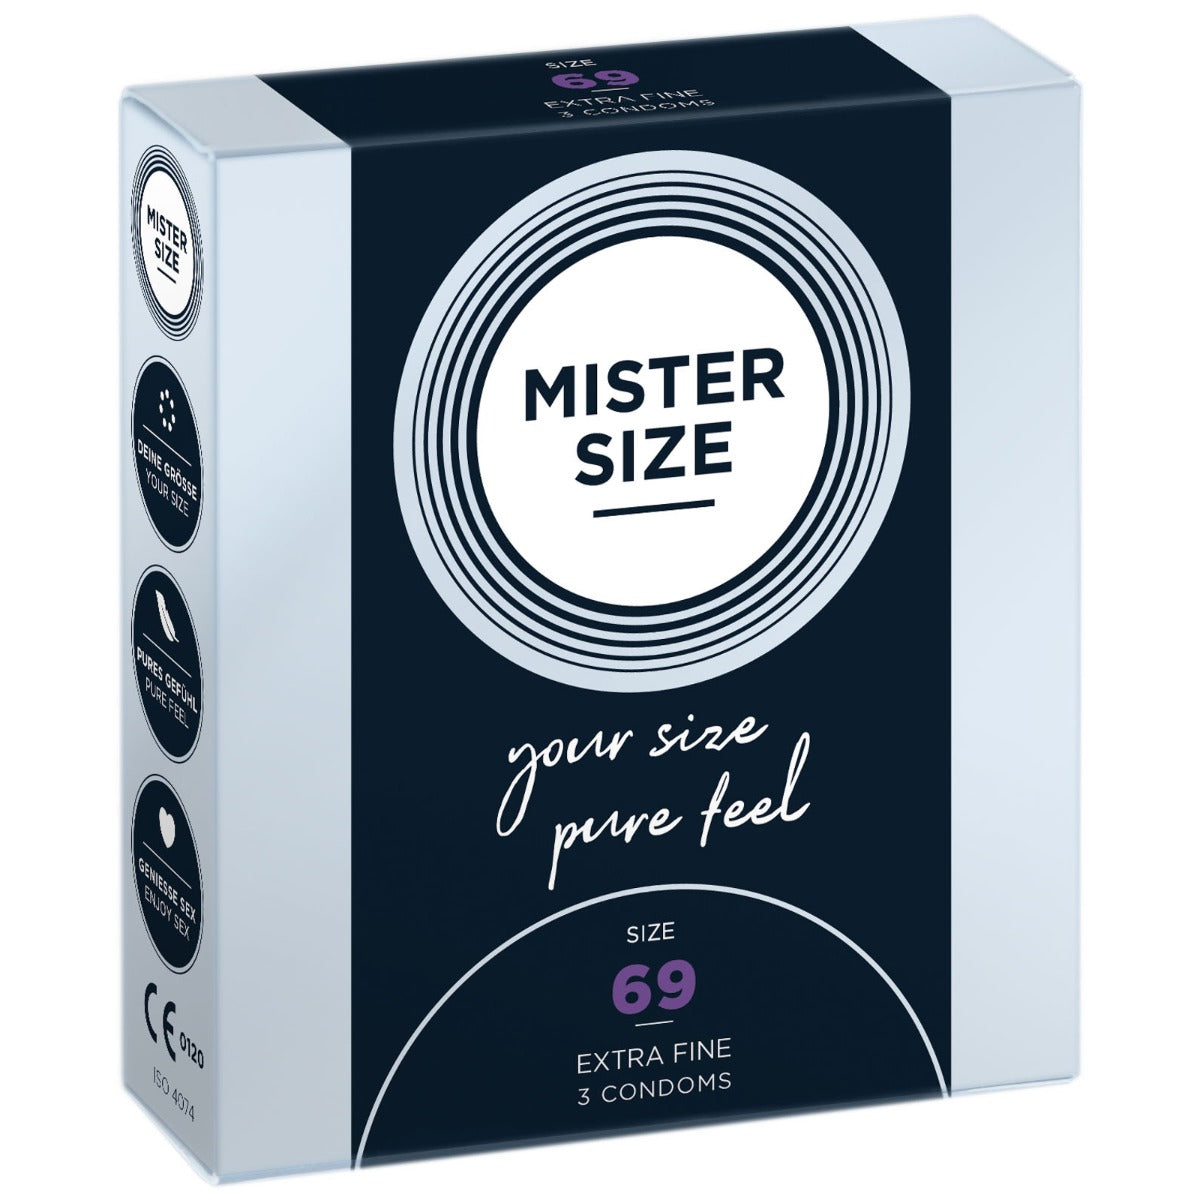 Condoms MISTER SIZE - pure feel Condoms - Size 69 mm (3 pack)   